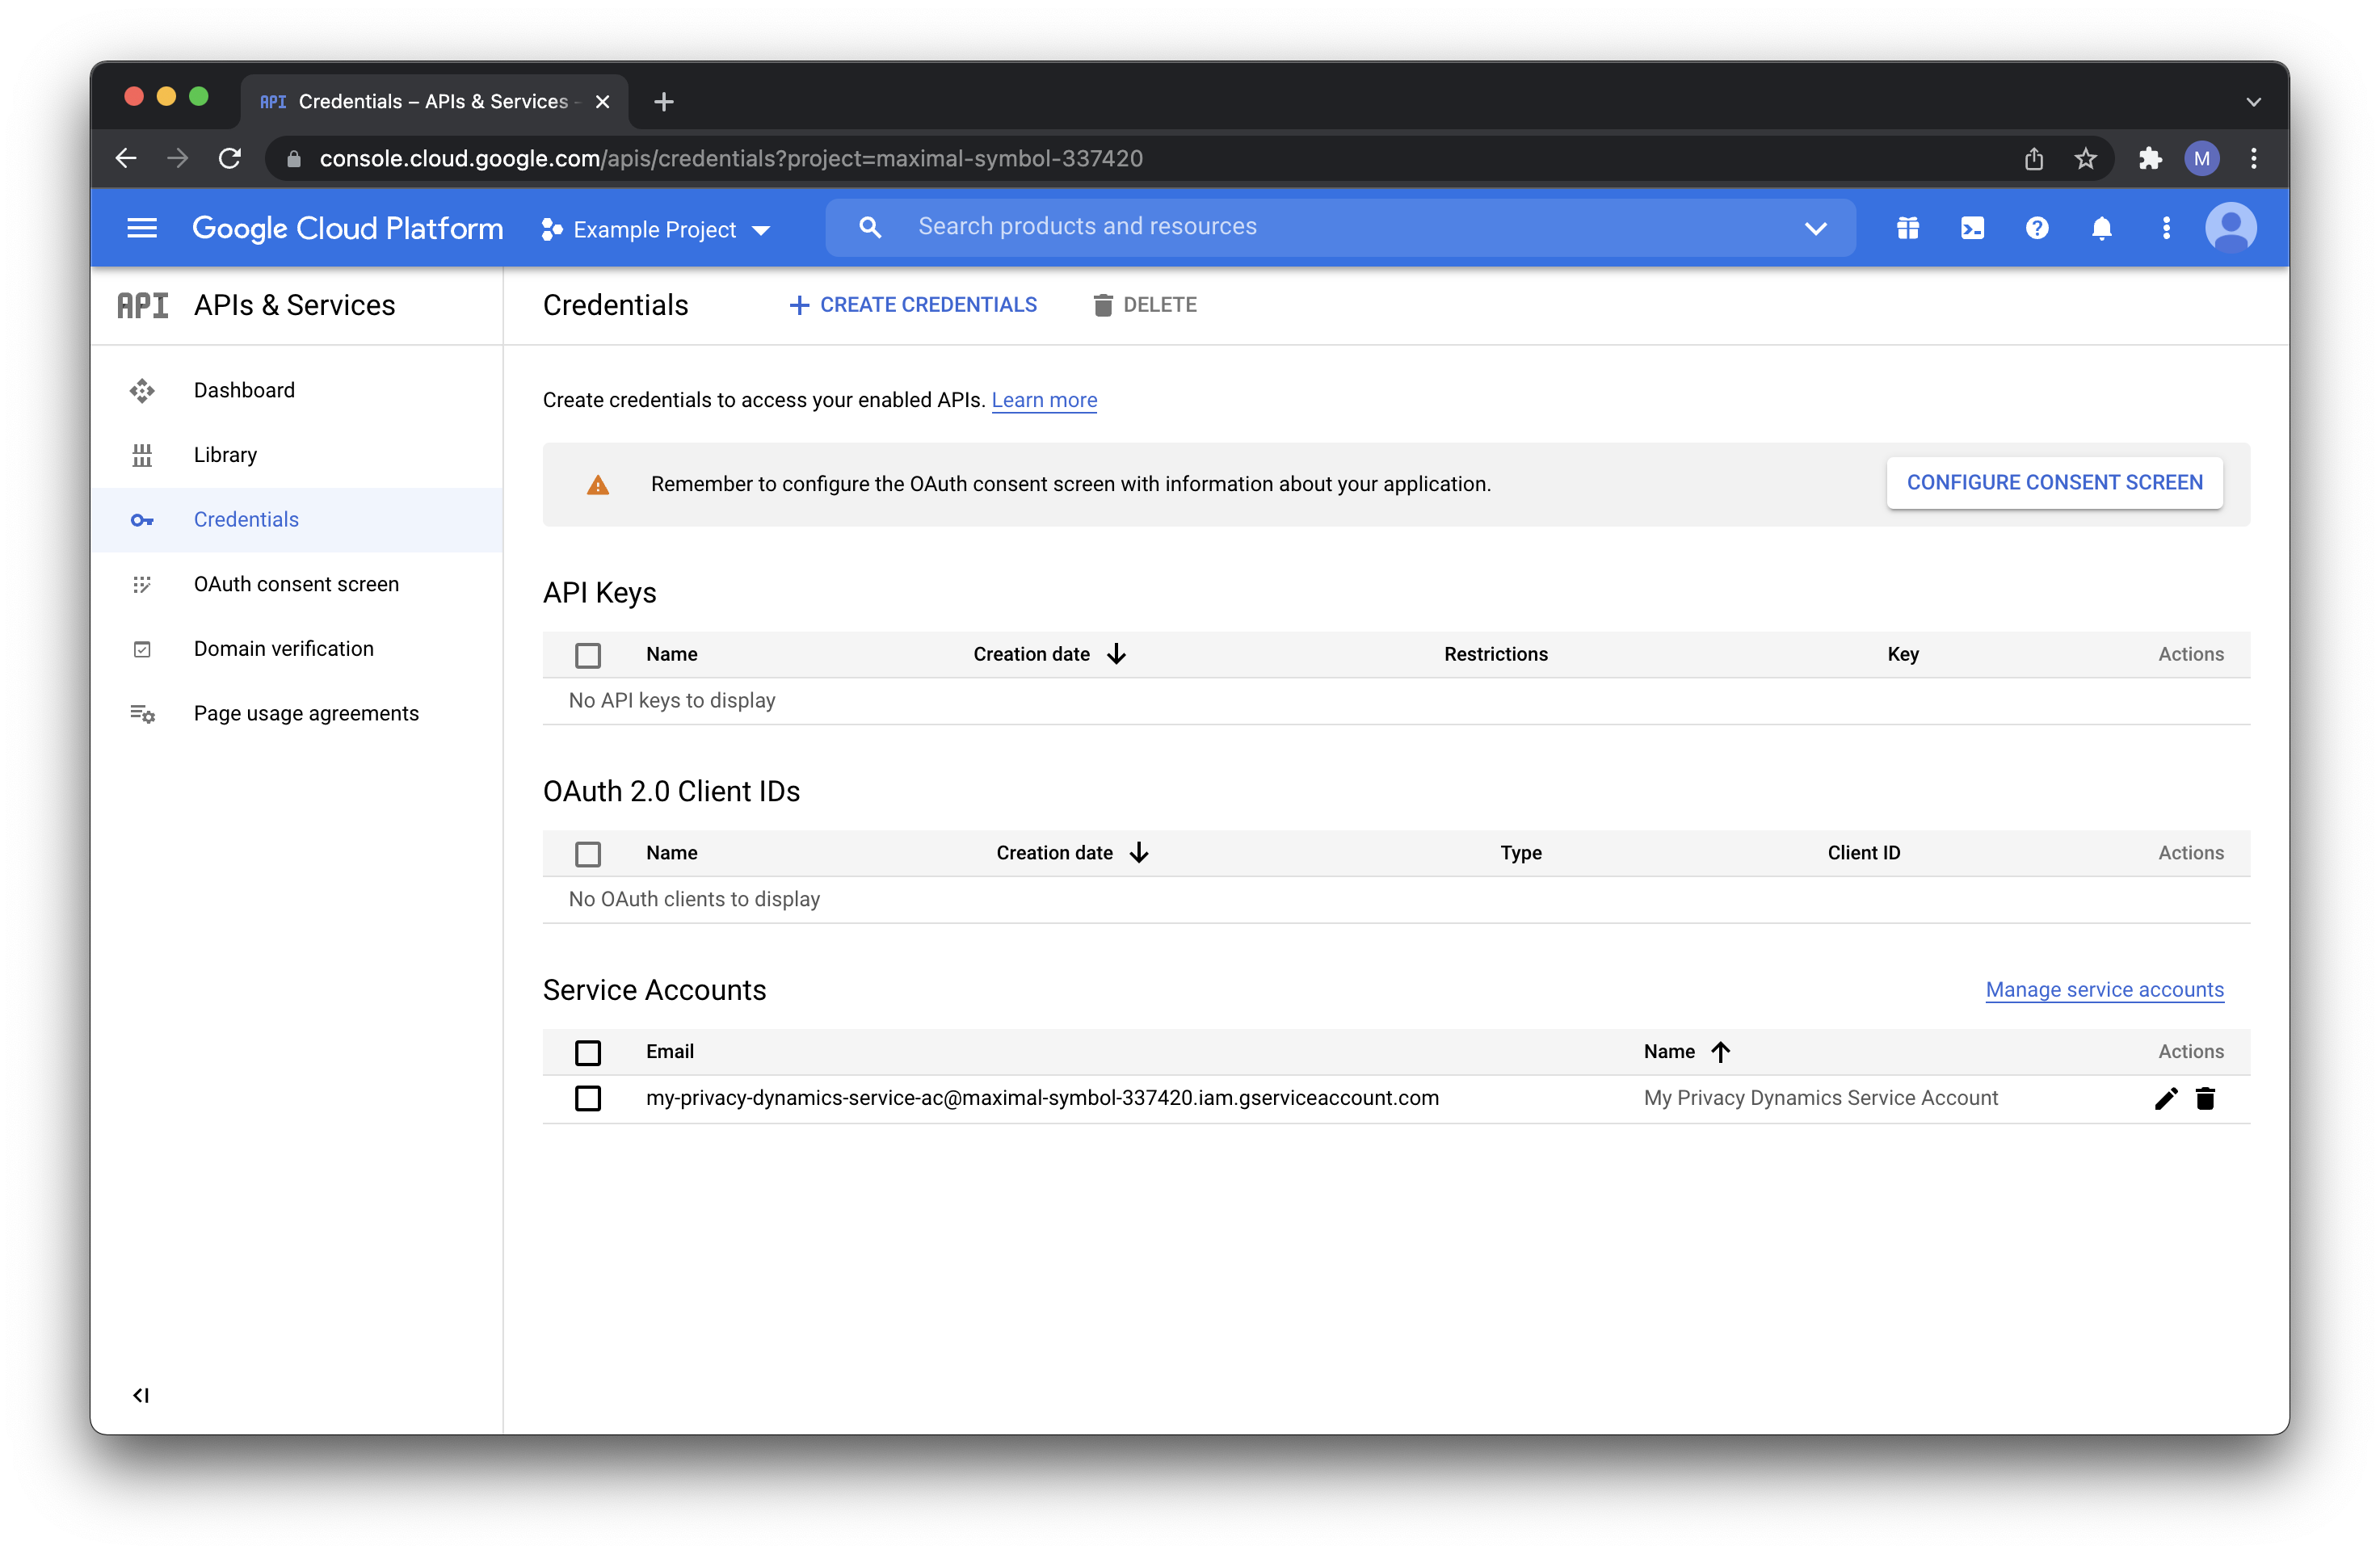 The Google Cloud Platform API Manager creates your new Privacy Dynamics’ service account.